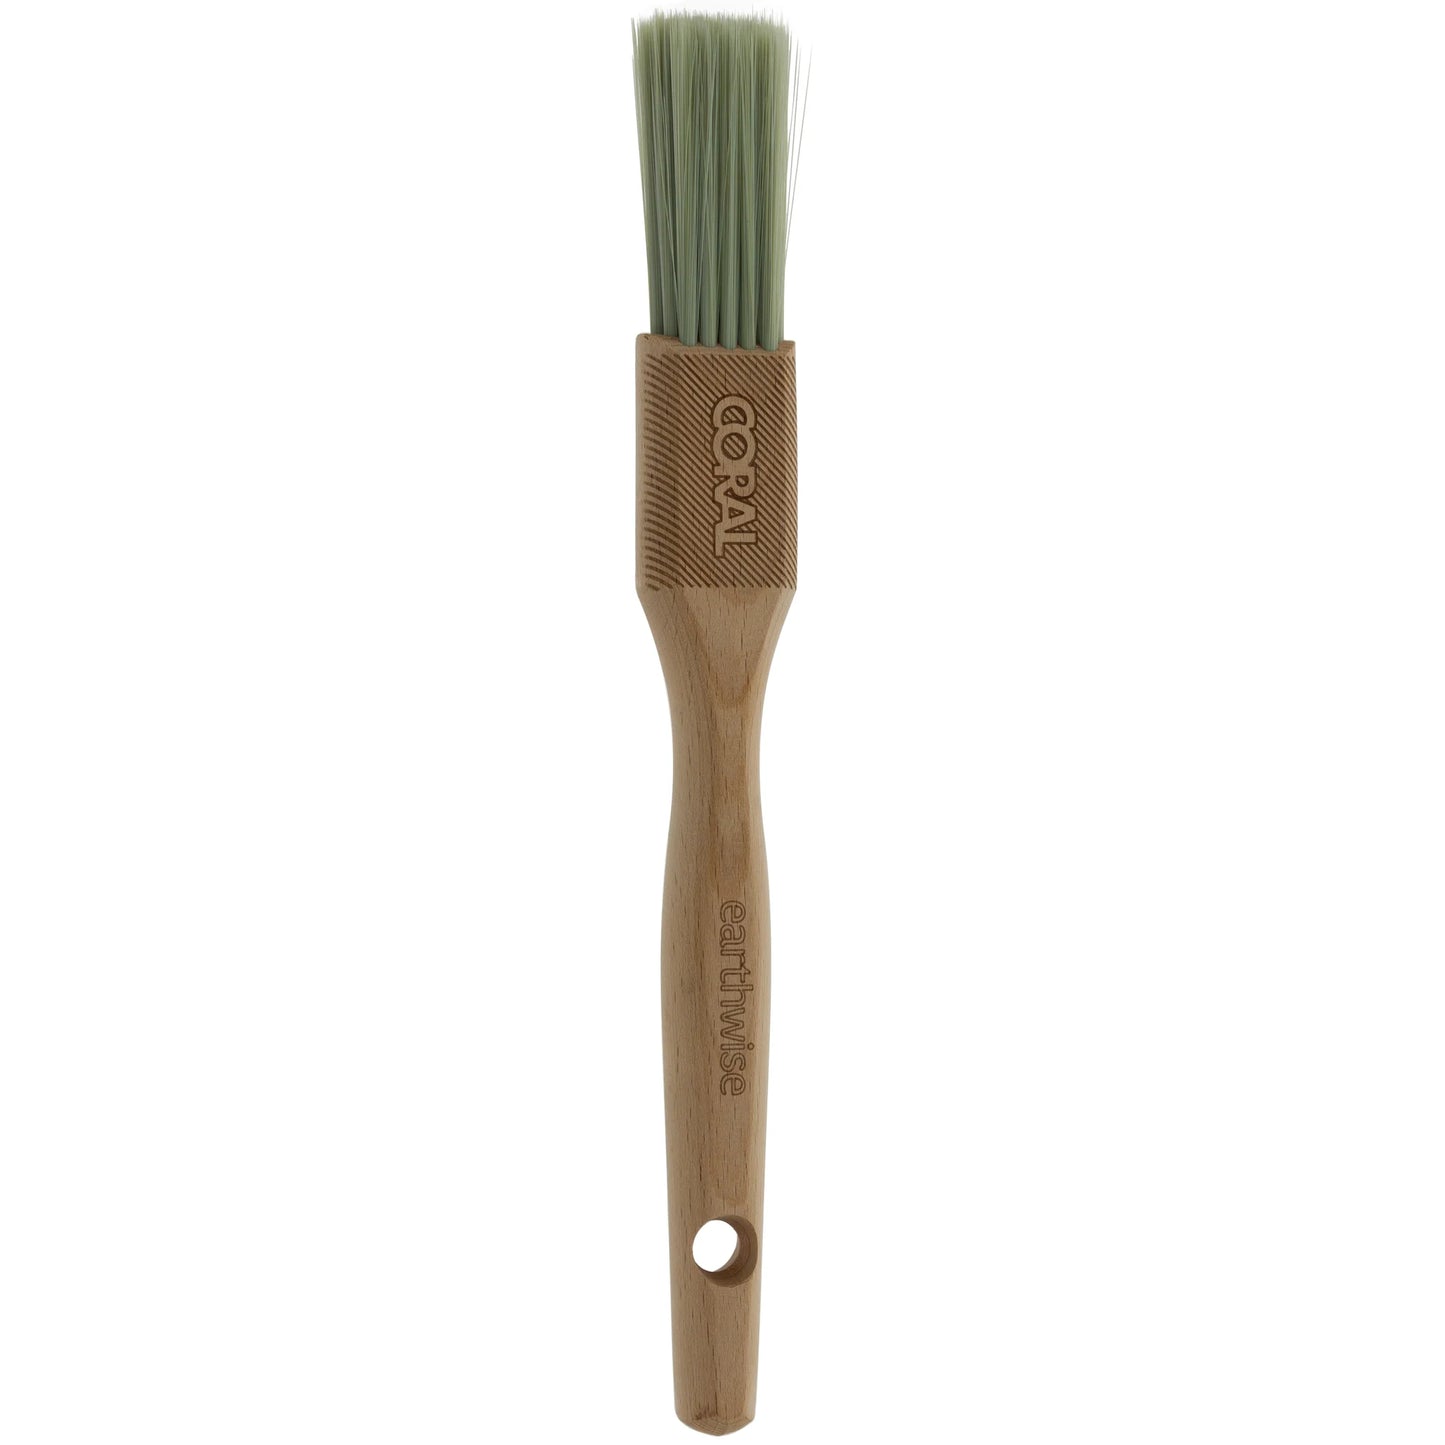 Earthwise 1" Paint Brush by Coral